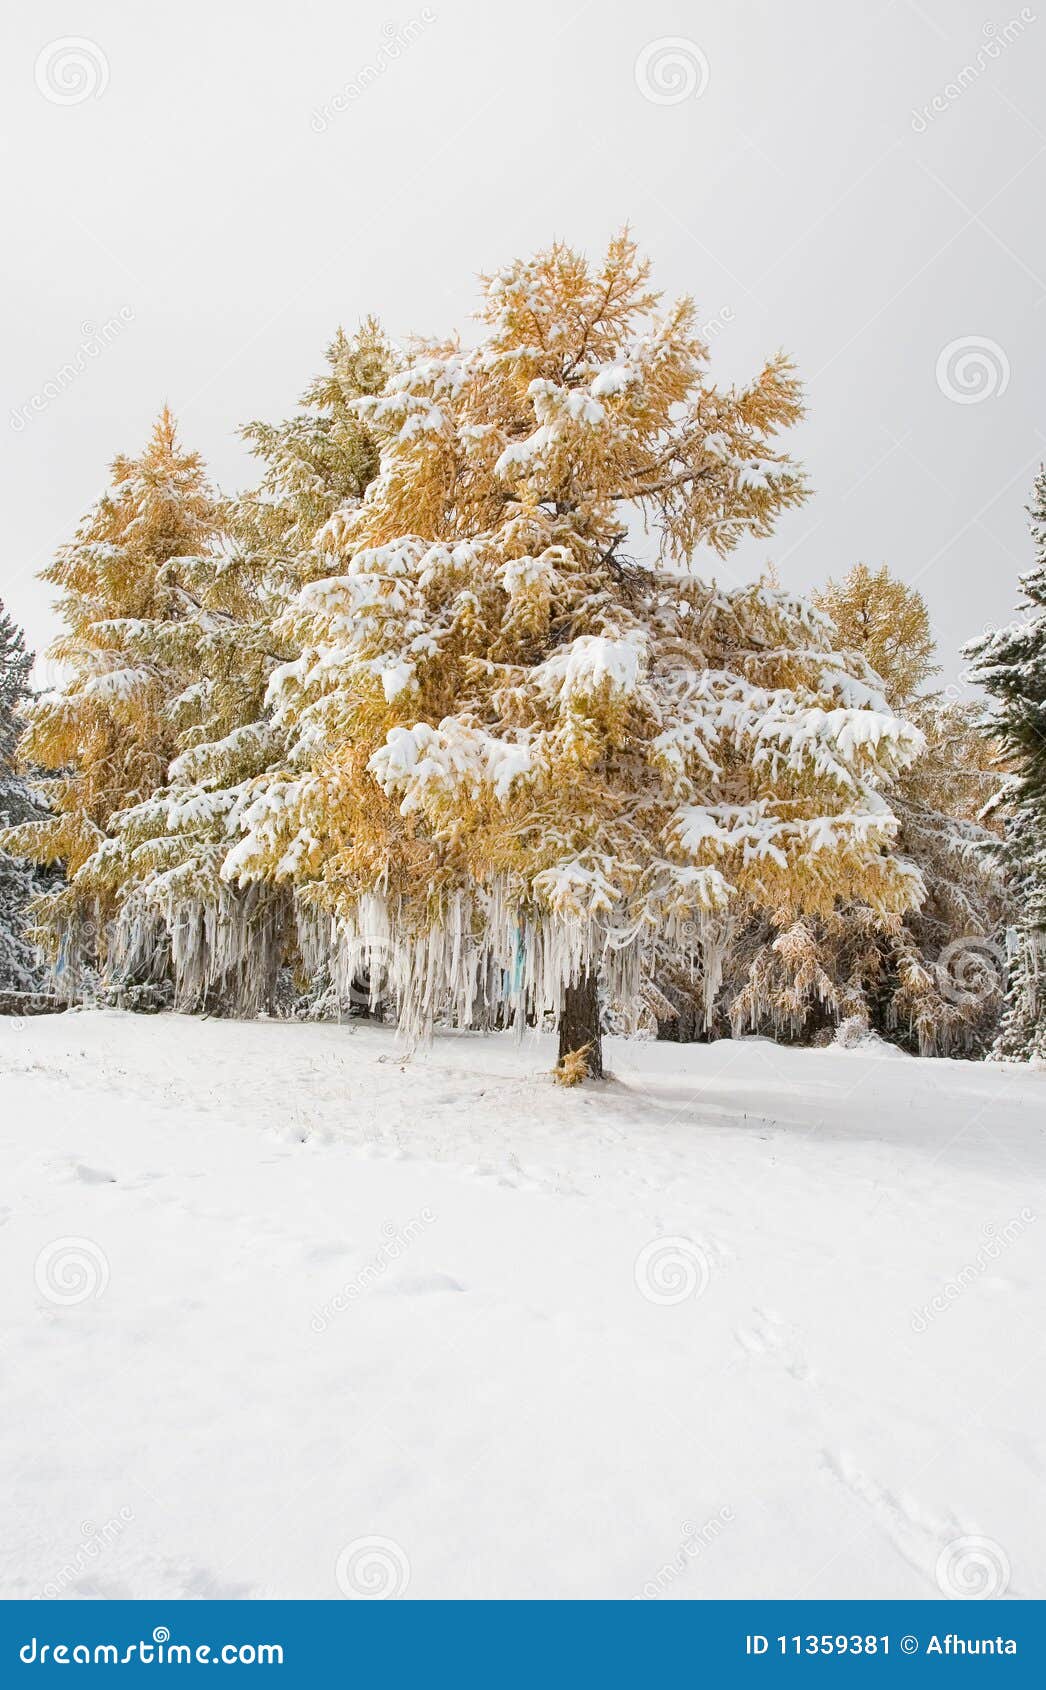 yellow larch decorated with white ribbons